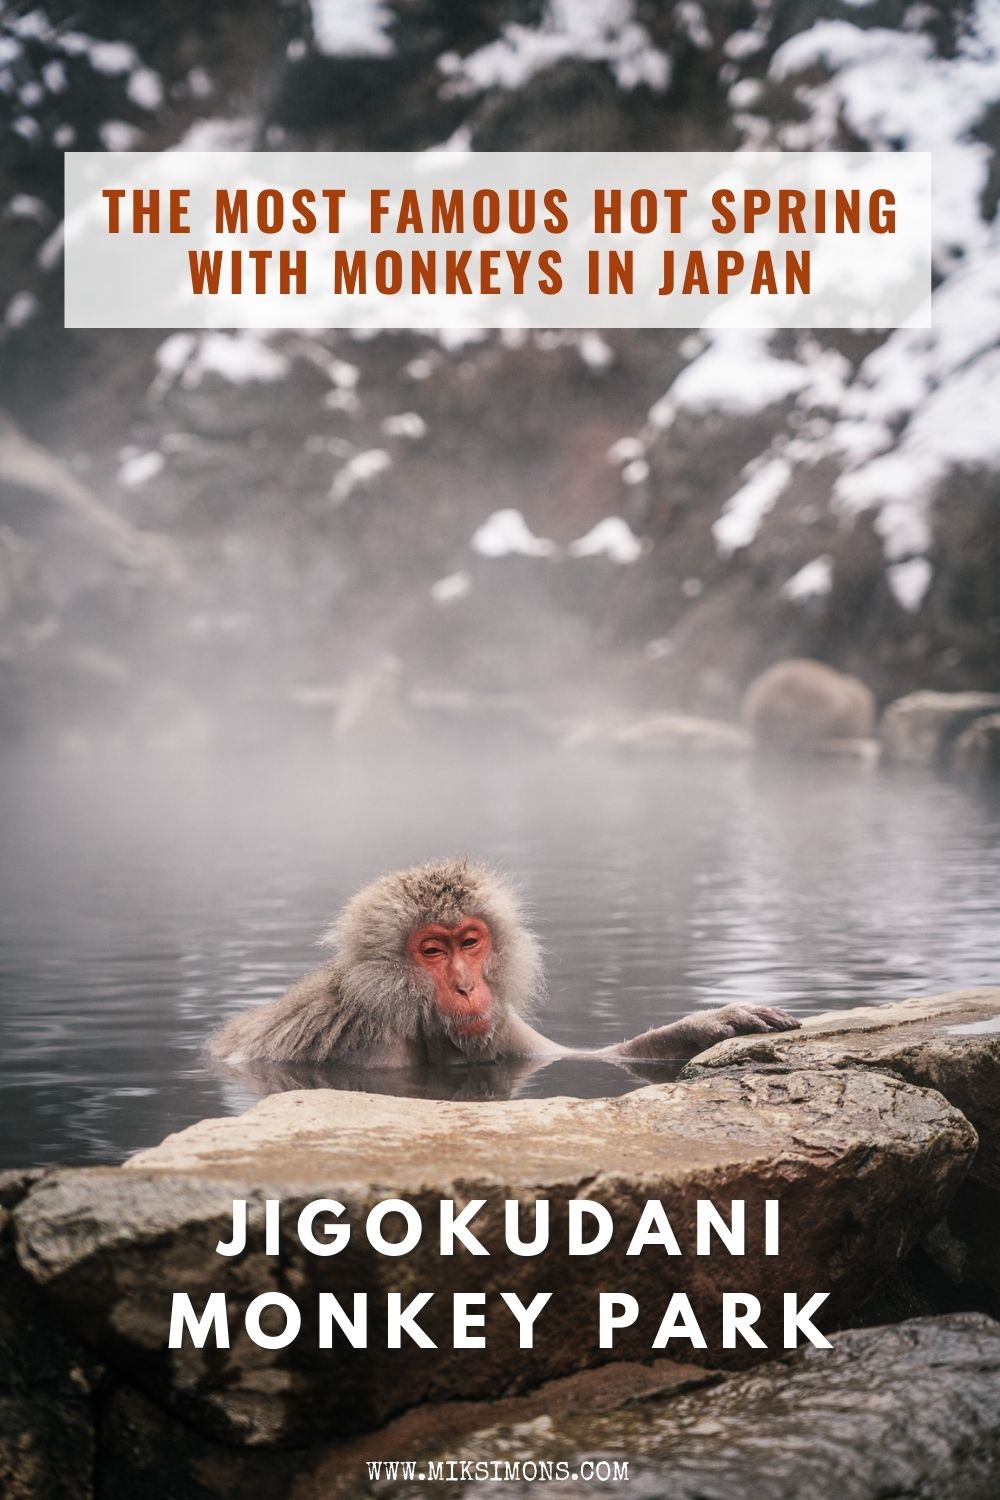 JIGOKUDANI MONKEY PARK - THE MOST FAMOUS HOT SPRING WITH MONKEYS IN JAPAN2